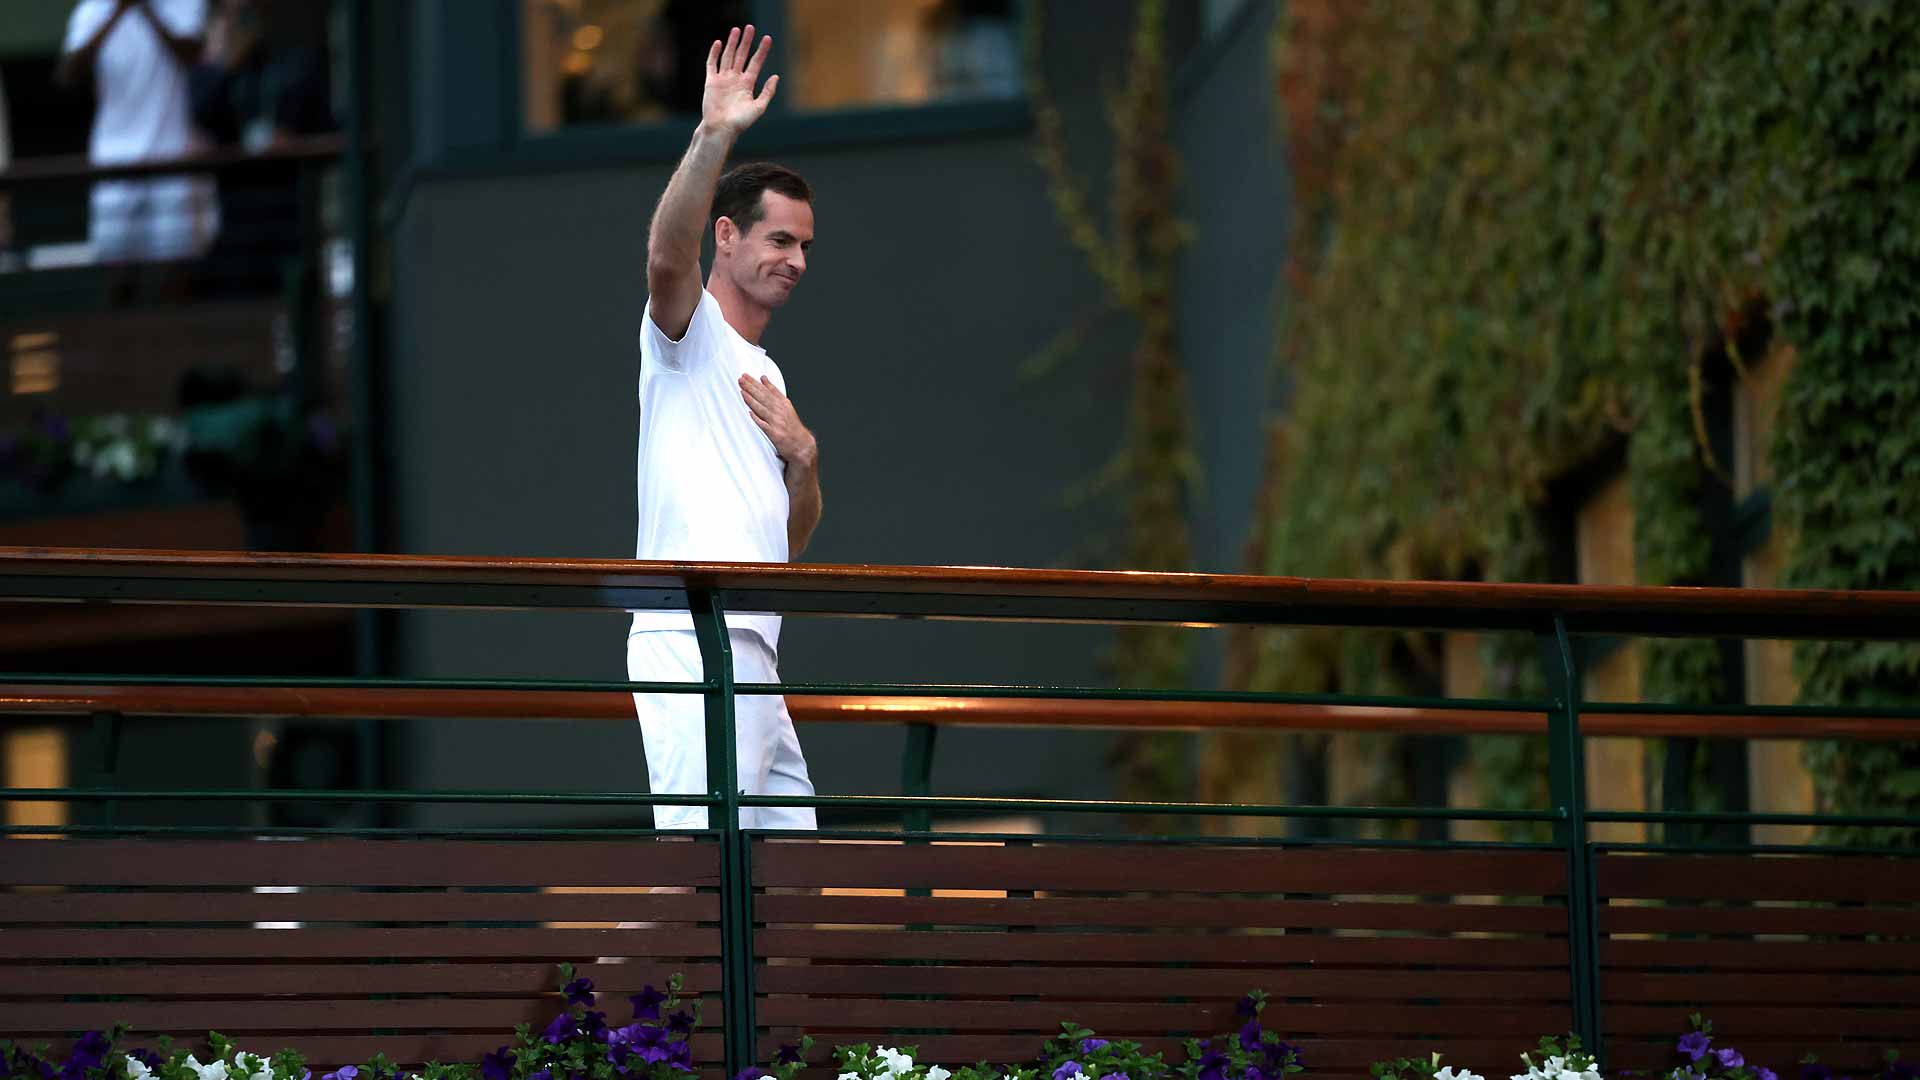 Murray's Wimbledon farewell: The man 'who left no stone unturned'